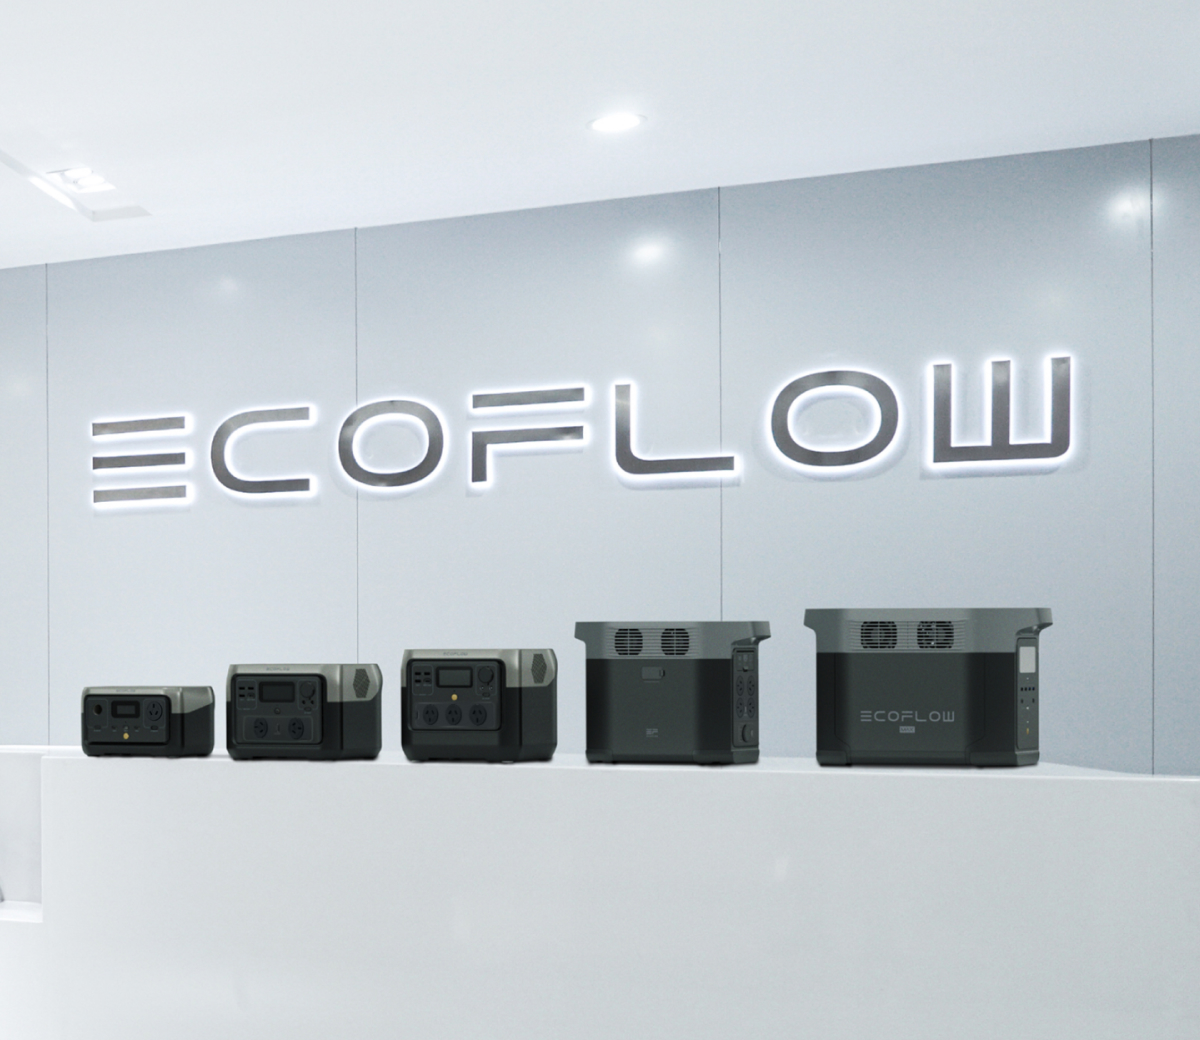 Why Choose EcoFlow's Battery Backup?